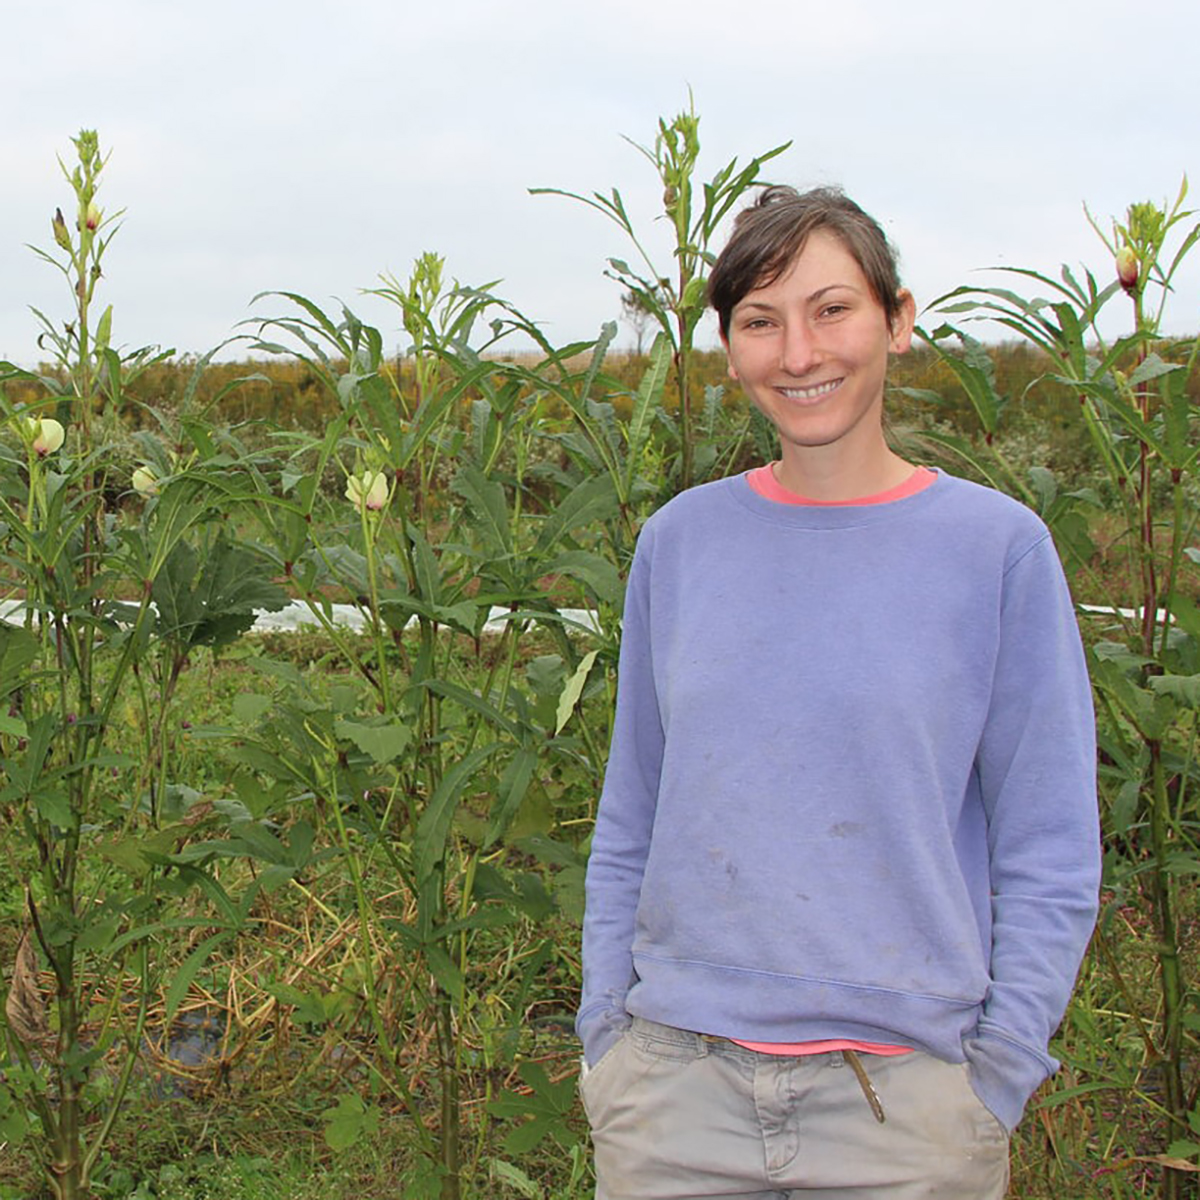 Photo of a woman standing in front of crops at Eden Hall Farm smiling.